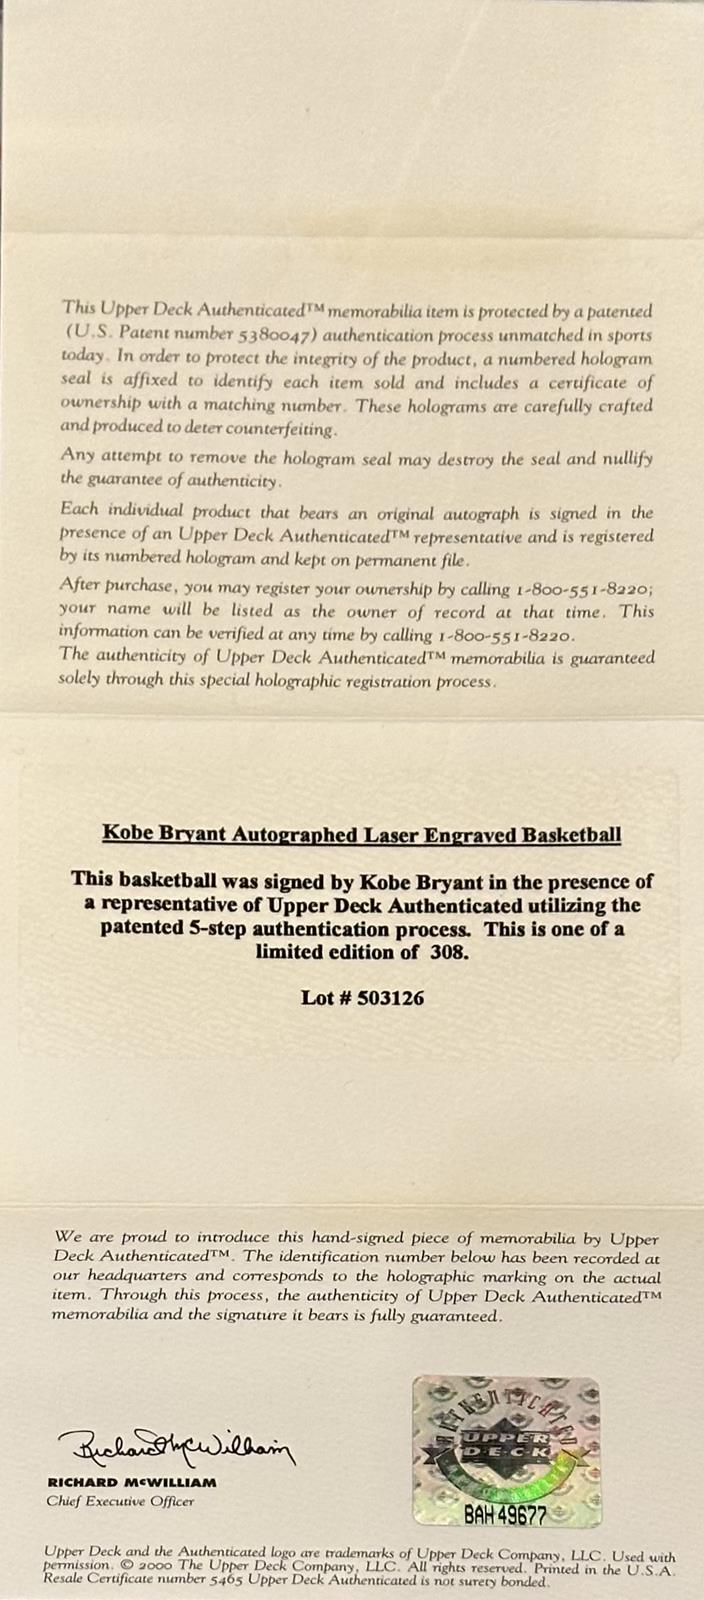 Kobe Bryant Autographed NBA Back-to-Back Champs Embossed Spalding Basketball Limited Edition #53 of 308 - UDA Upper Deck